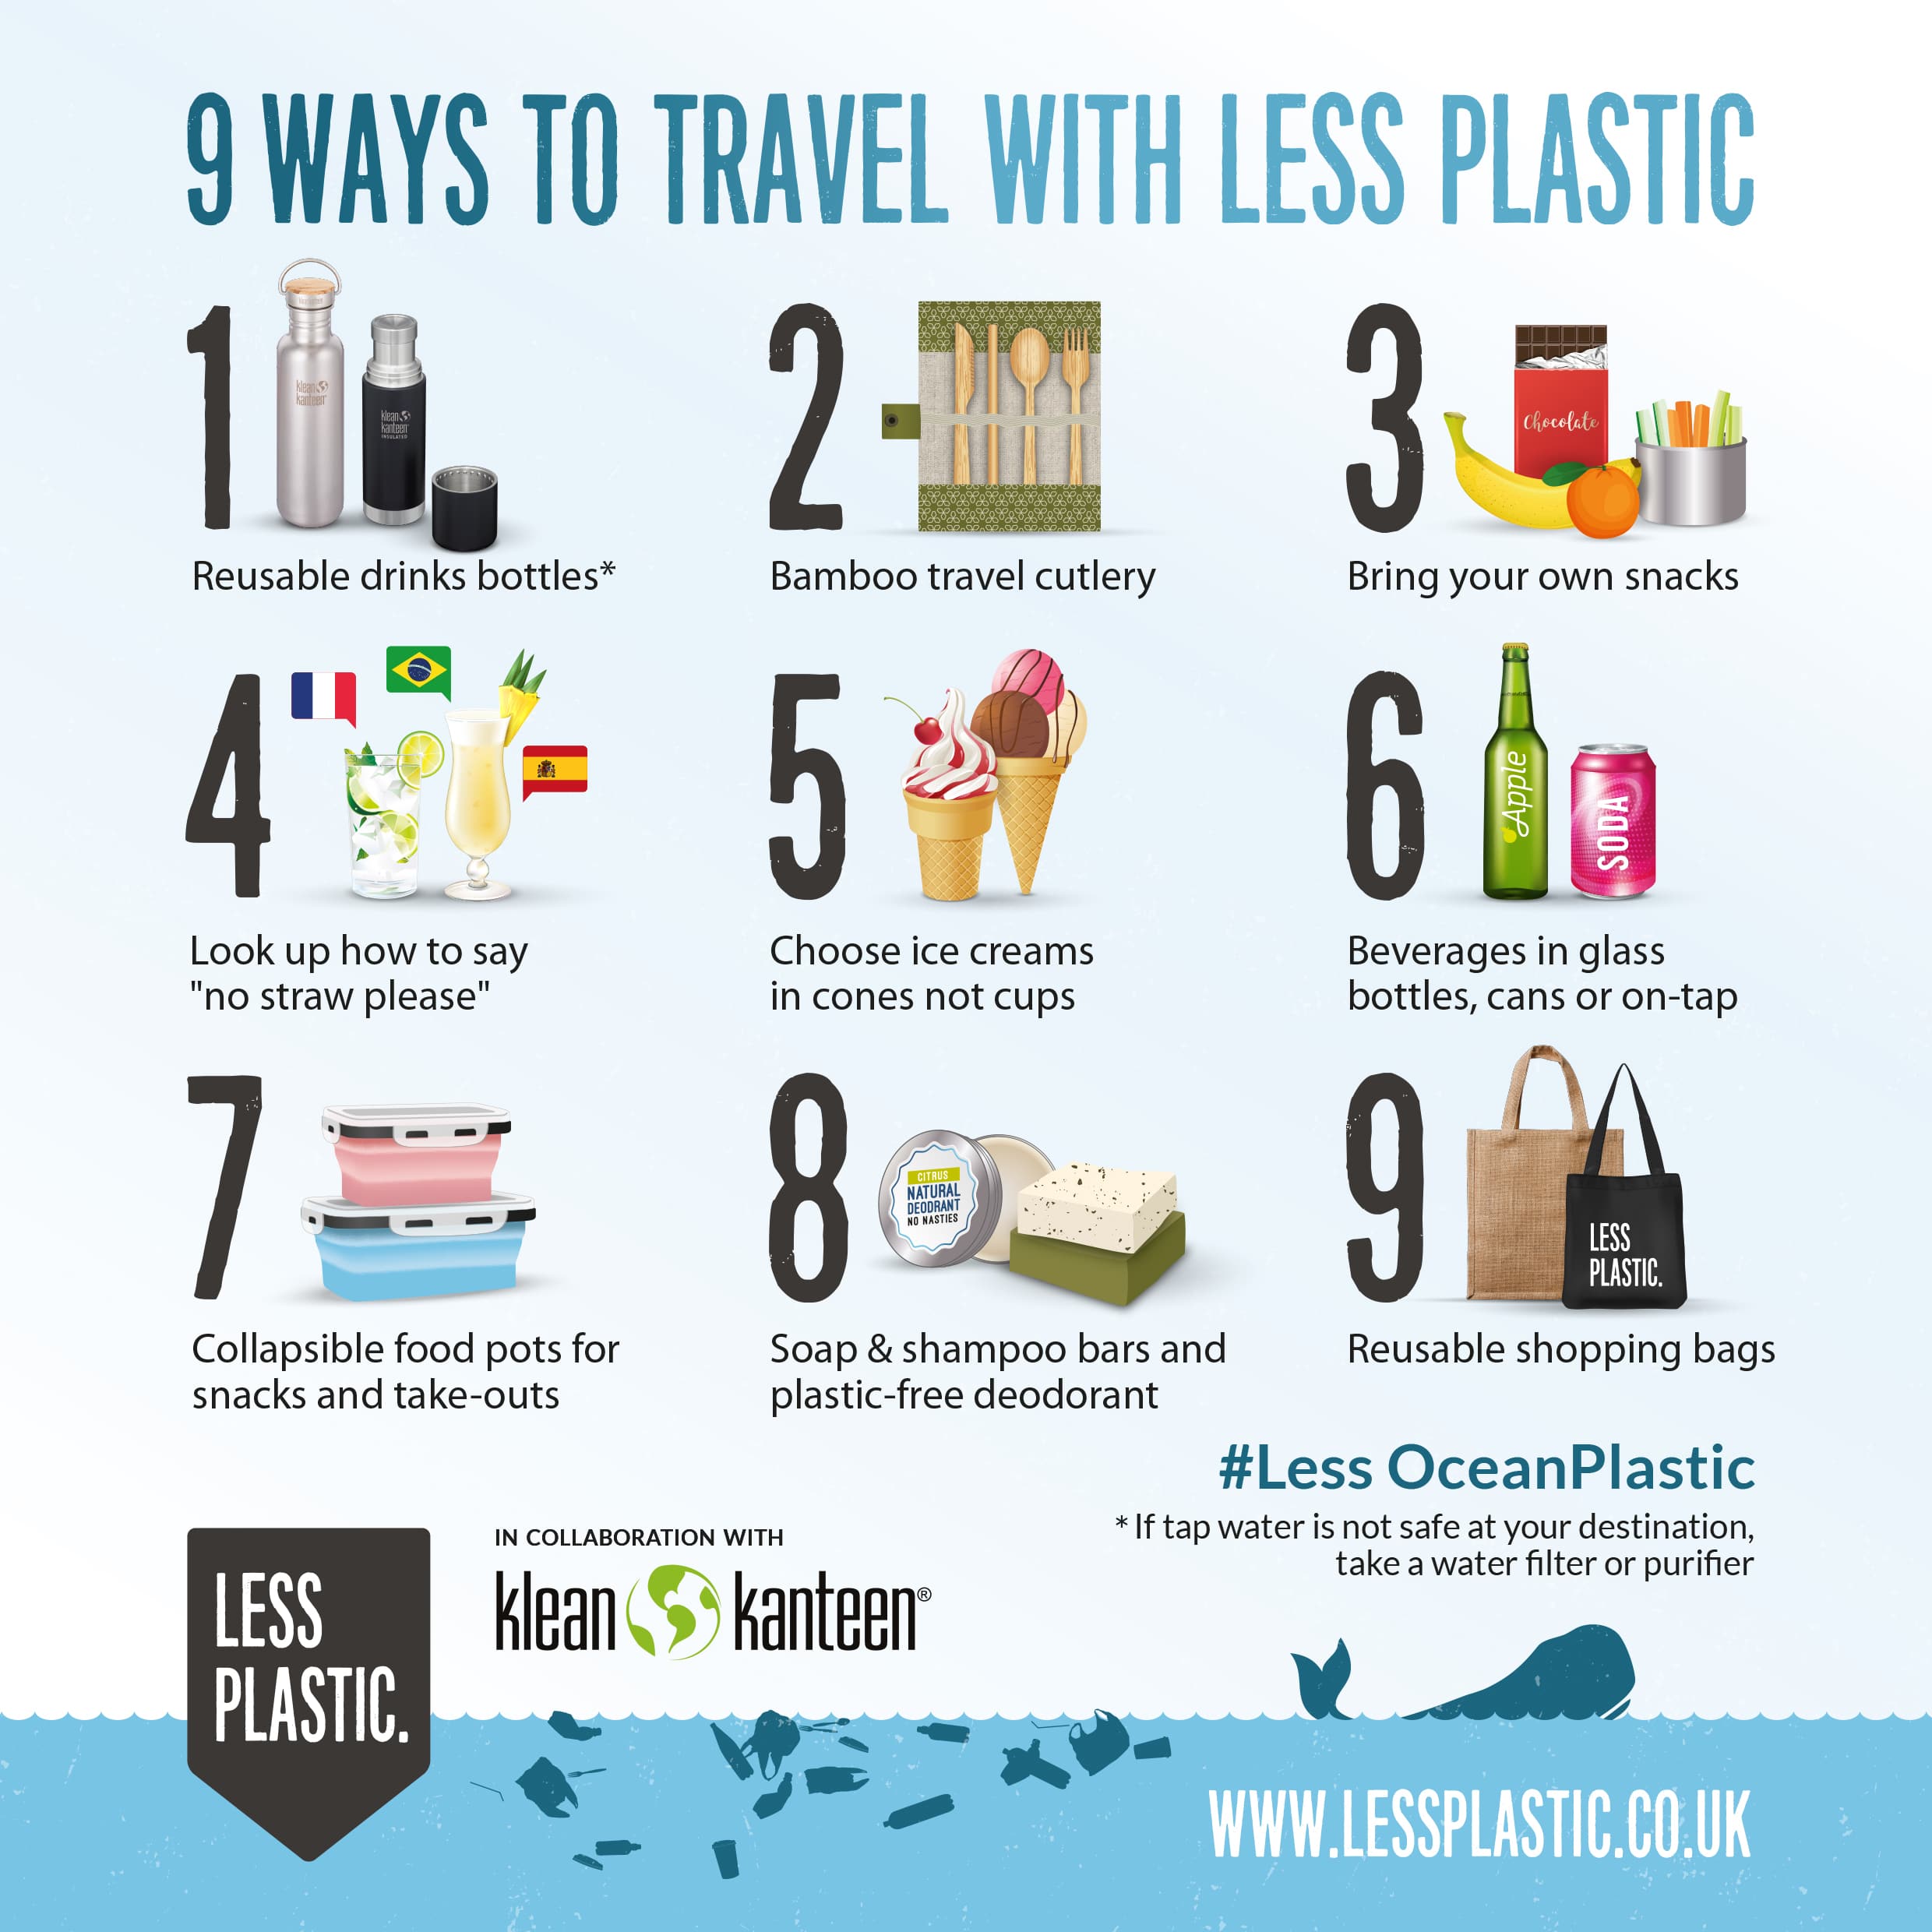 9 ways to travel with less plastic infographic